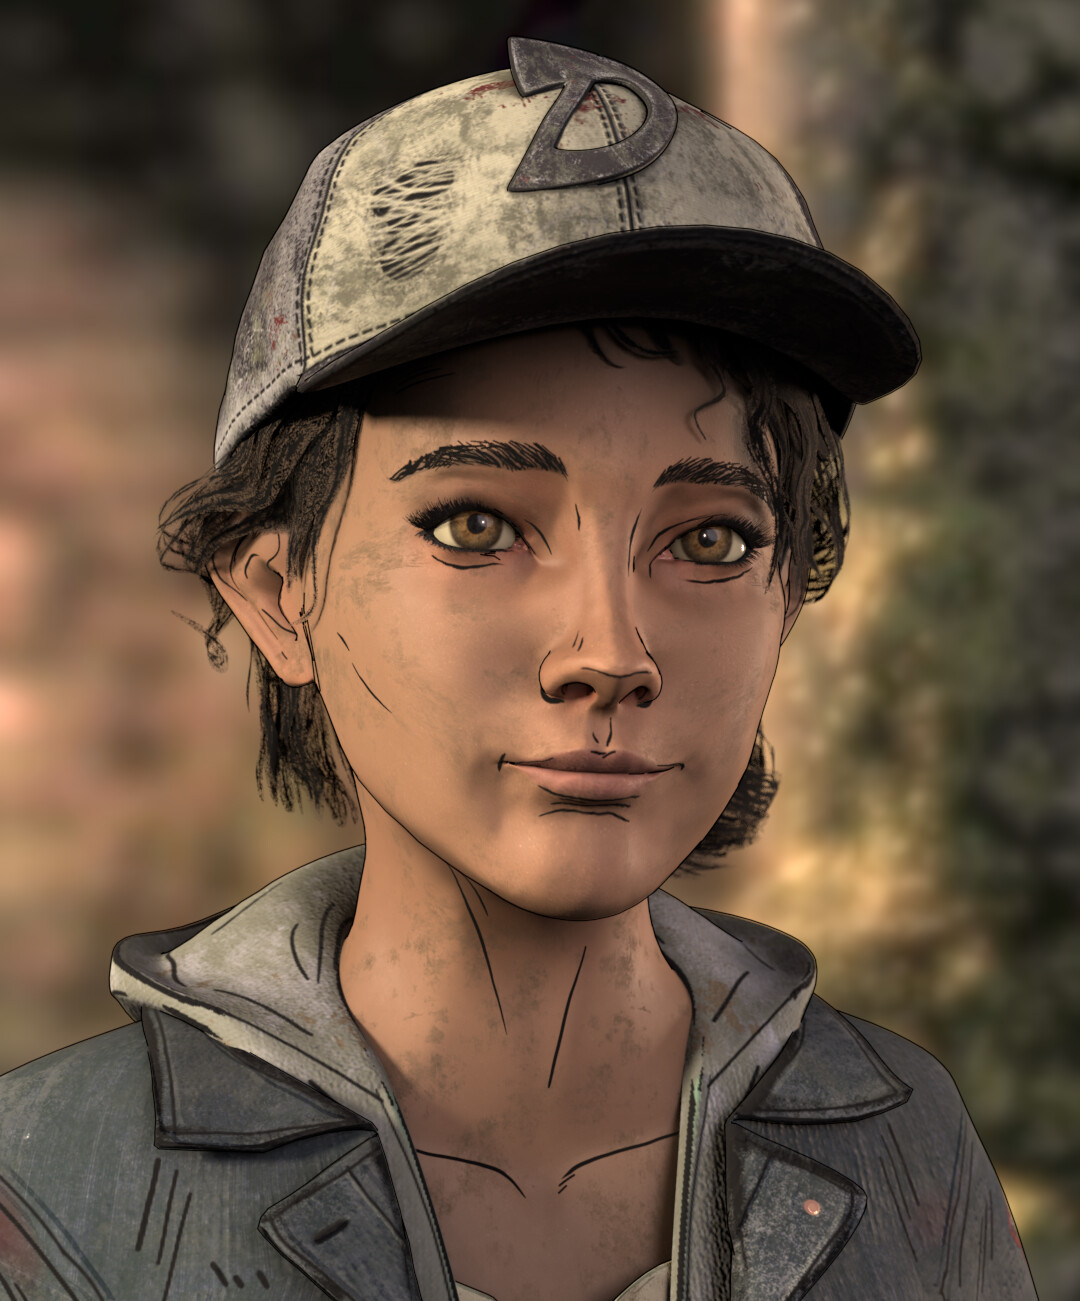 Sweet pea Clementine from Telltale's / Skybound's The Walking Dea...